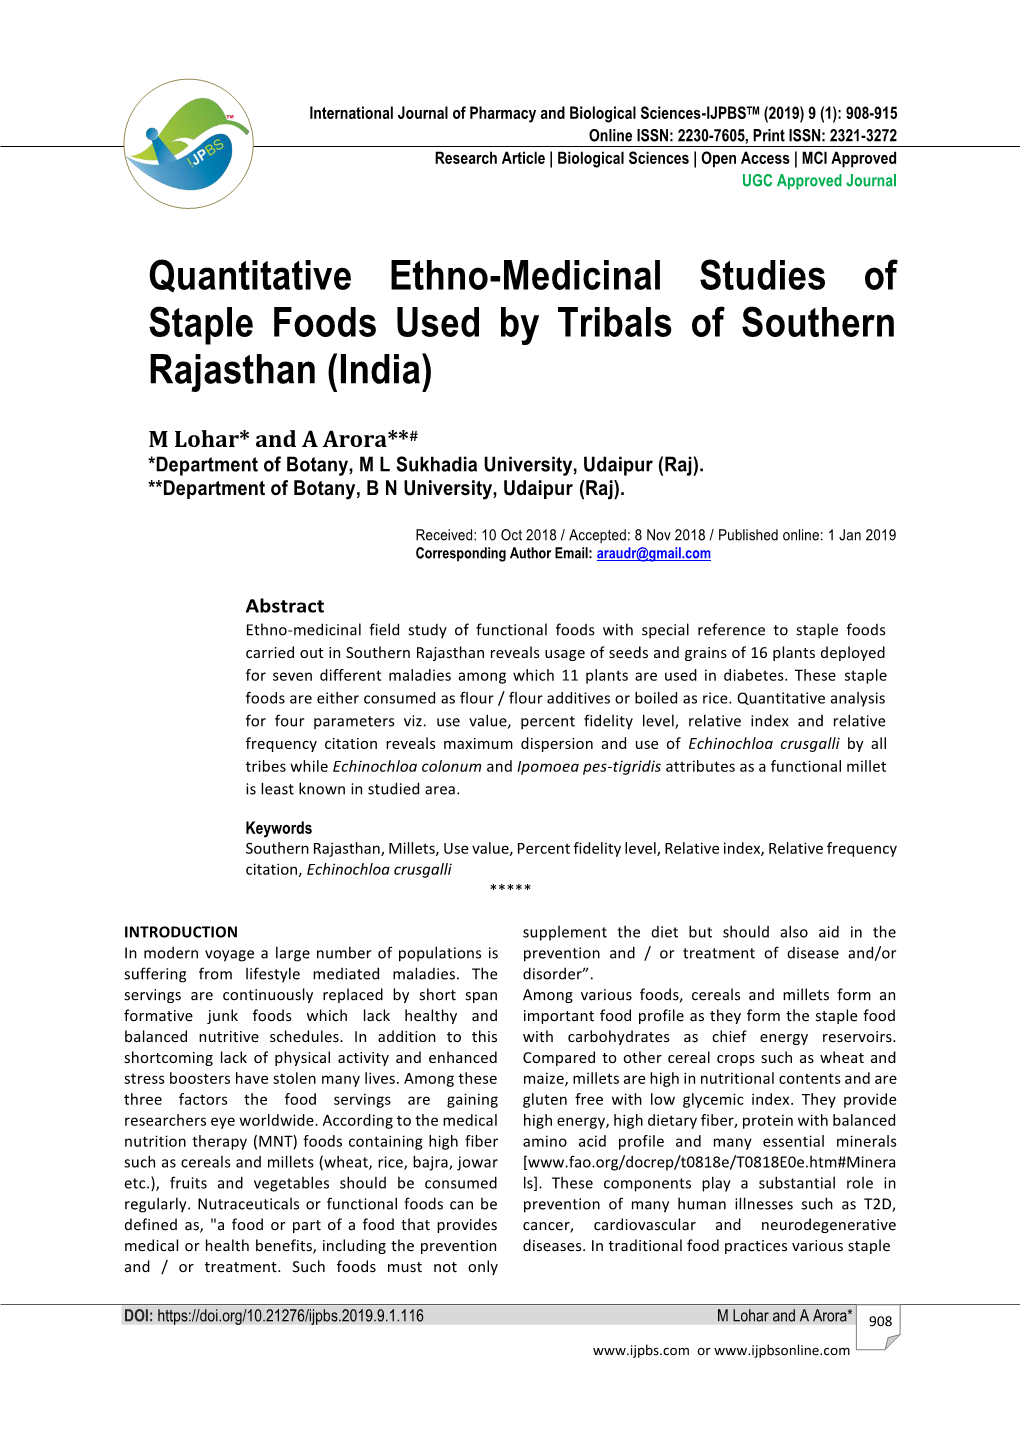 Quantitative Ethno-Medicinal Studies of Staple Foods Used by Tribals of Southern Rajasthan (India)